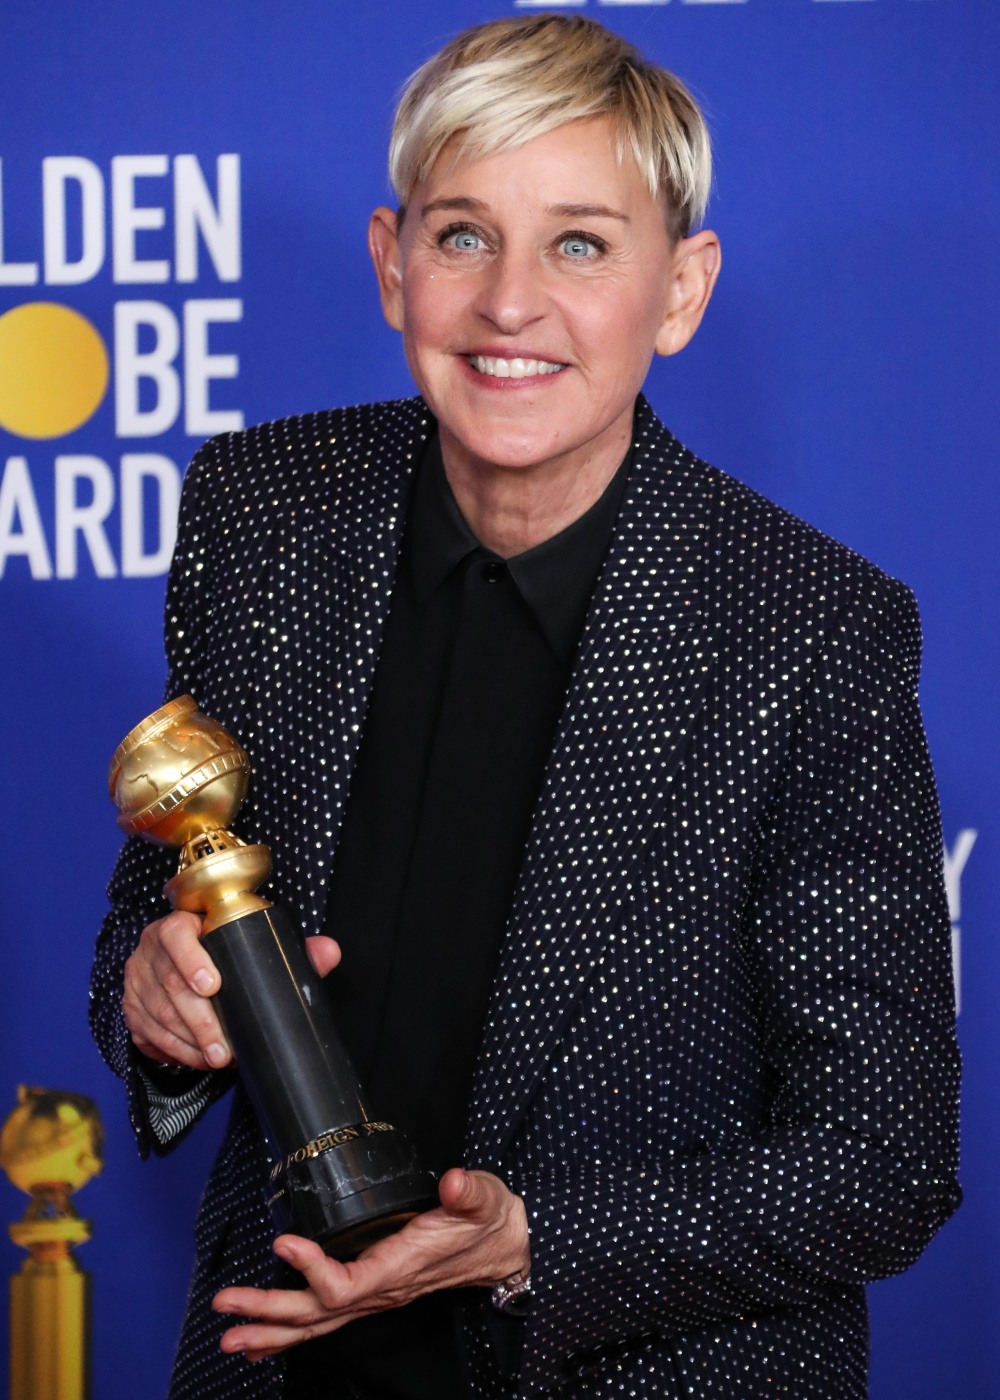 Comedian Ellen DeGeneres wearing Celine poses in the press room at the 77th Annual Golden Globe Awards held at The Beverly Hilton Hotel on January 5, 2020 in Beverly Hills, Los Angeles, California, United States.